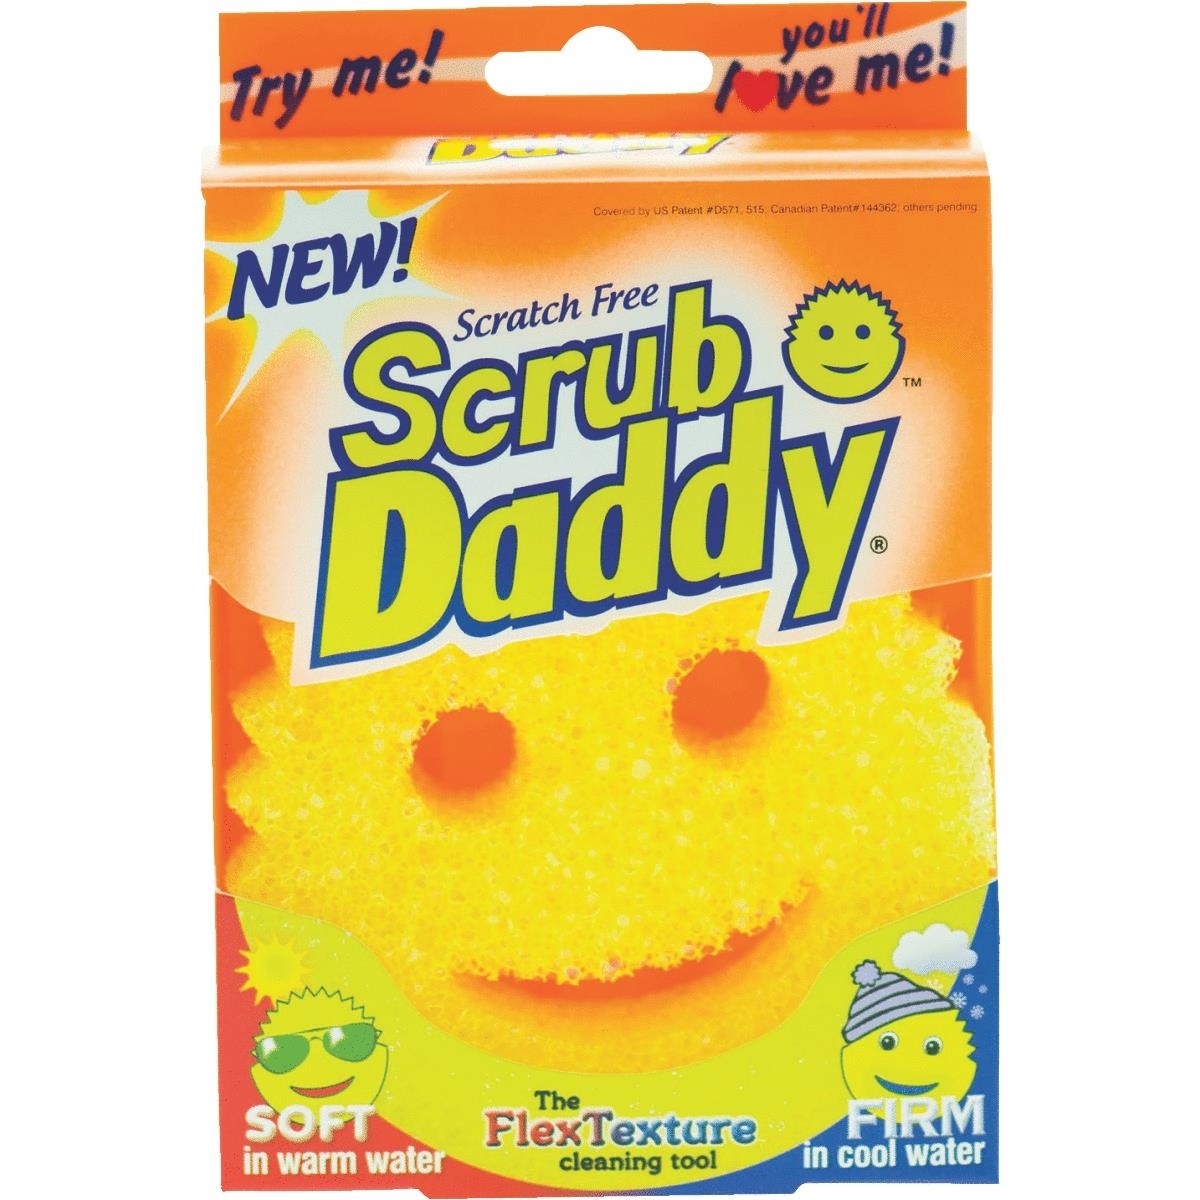 https://ak1.ostkcdn.com/images/products/is/images/direct/83a7693a5121542b127e6ed3a7a1ff6620e0354f/Scrub-Daddy-Scrub-Daddy-Scrubber.jpg